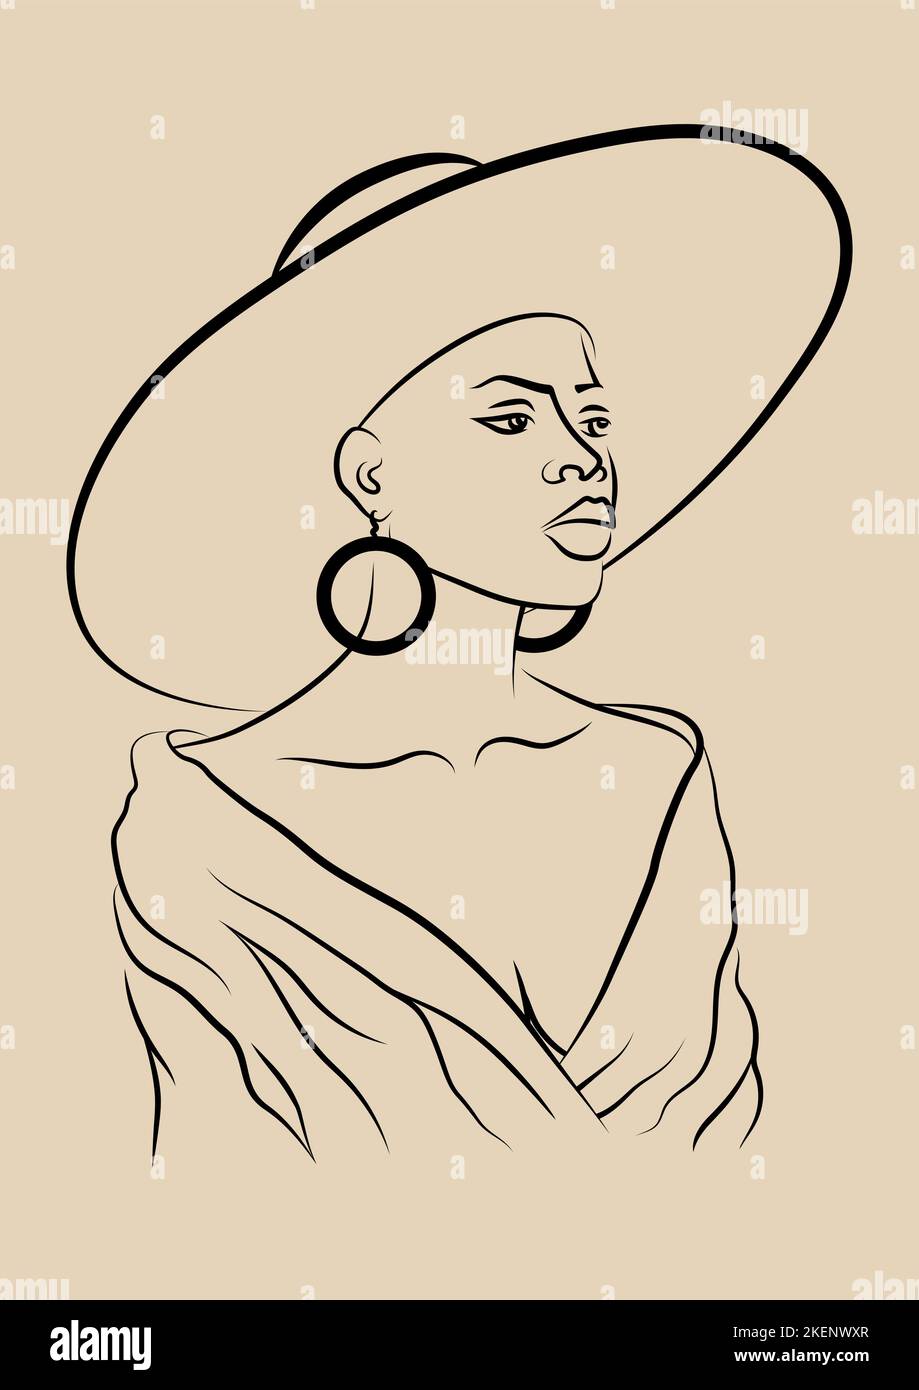 African woman in hat linear drawing illustration Stock Vector Image ...